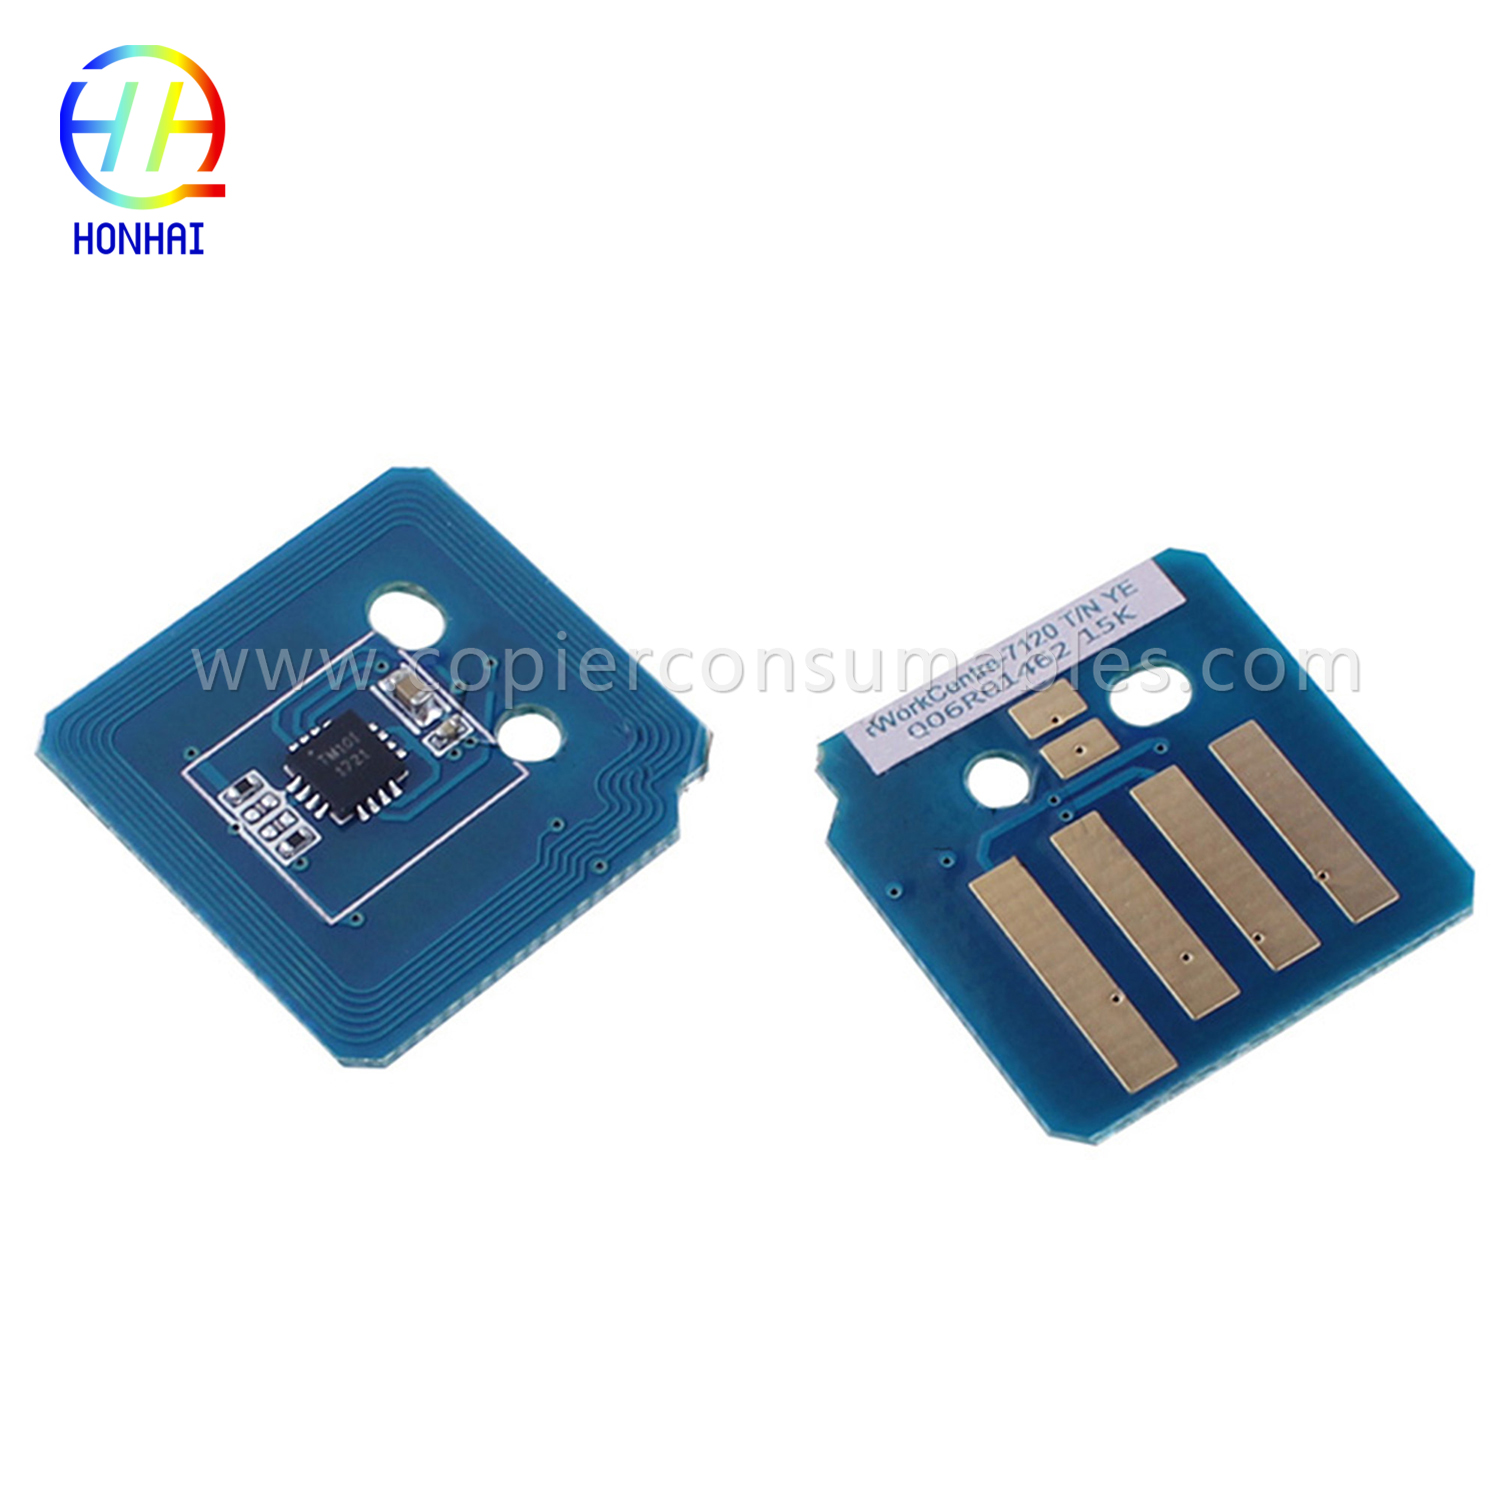 Toner Chip for Xerox Workcentre 7120 7125 7220 7225 (006R01461 006R01462 006R01463 006R01464)